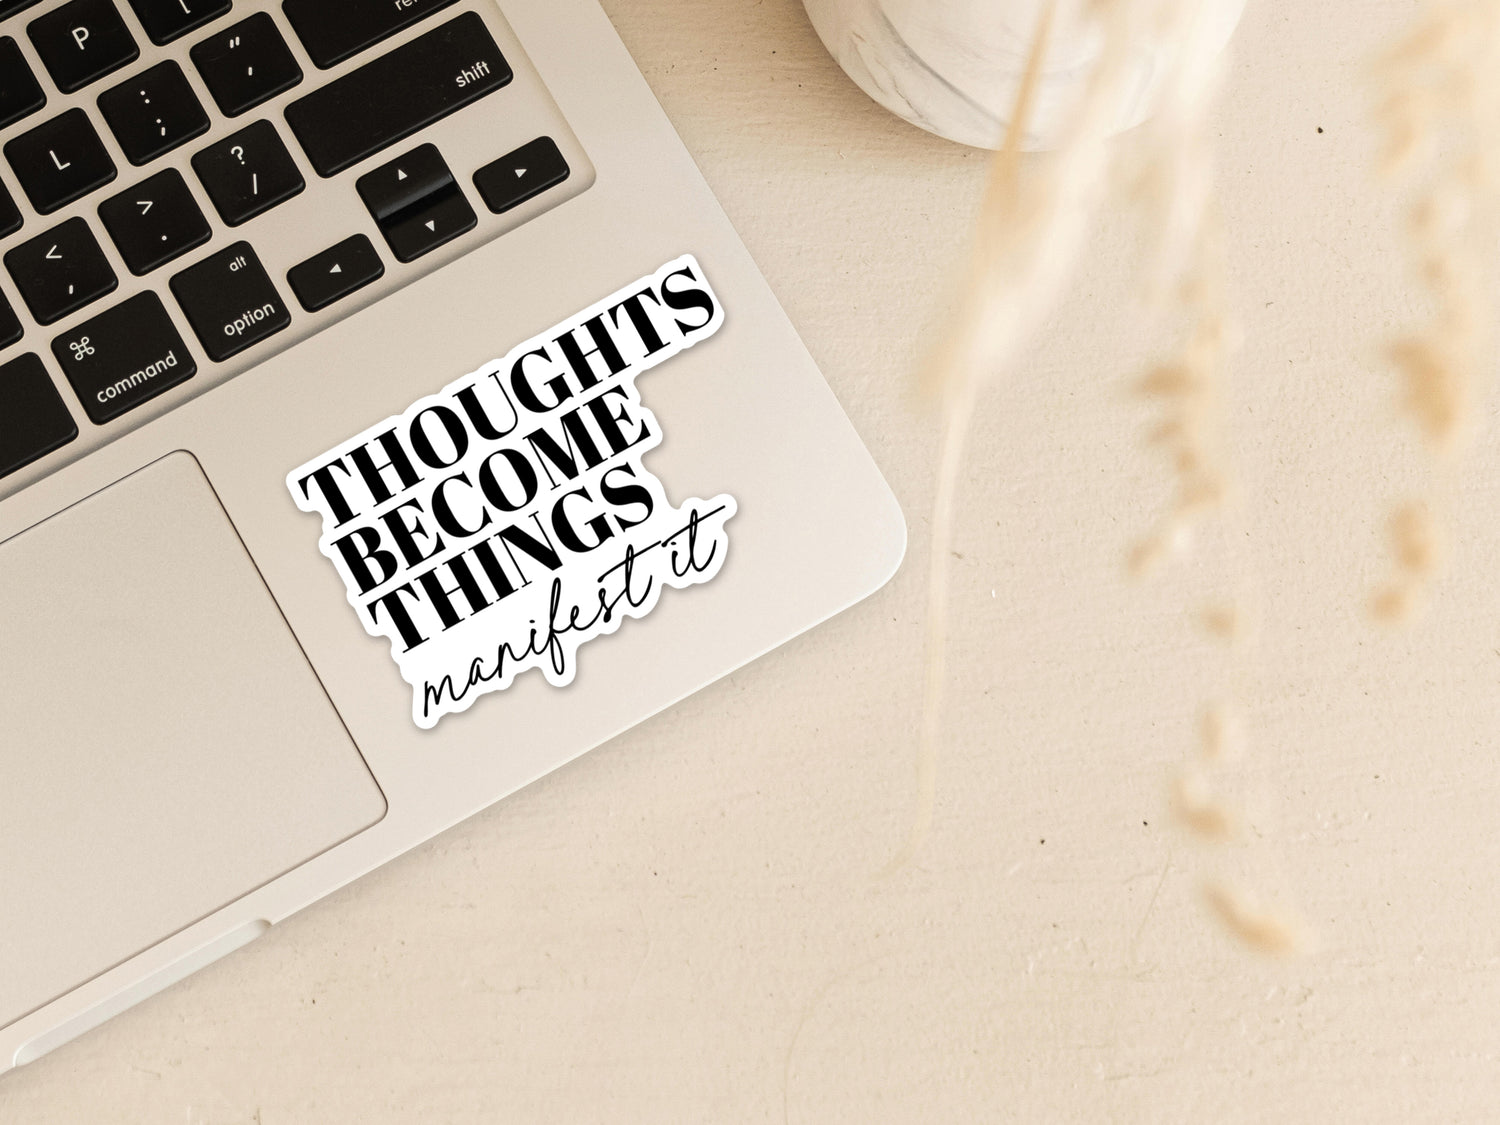 Thoughts become things manifest it Vinyl Sticker Stickers - Creativien